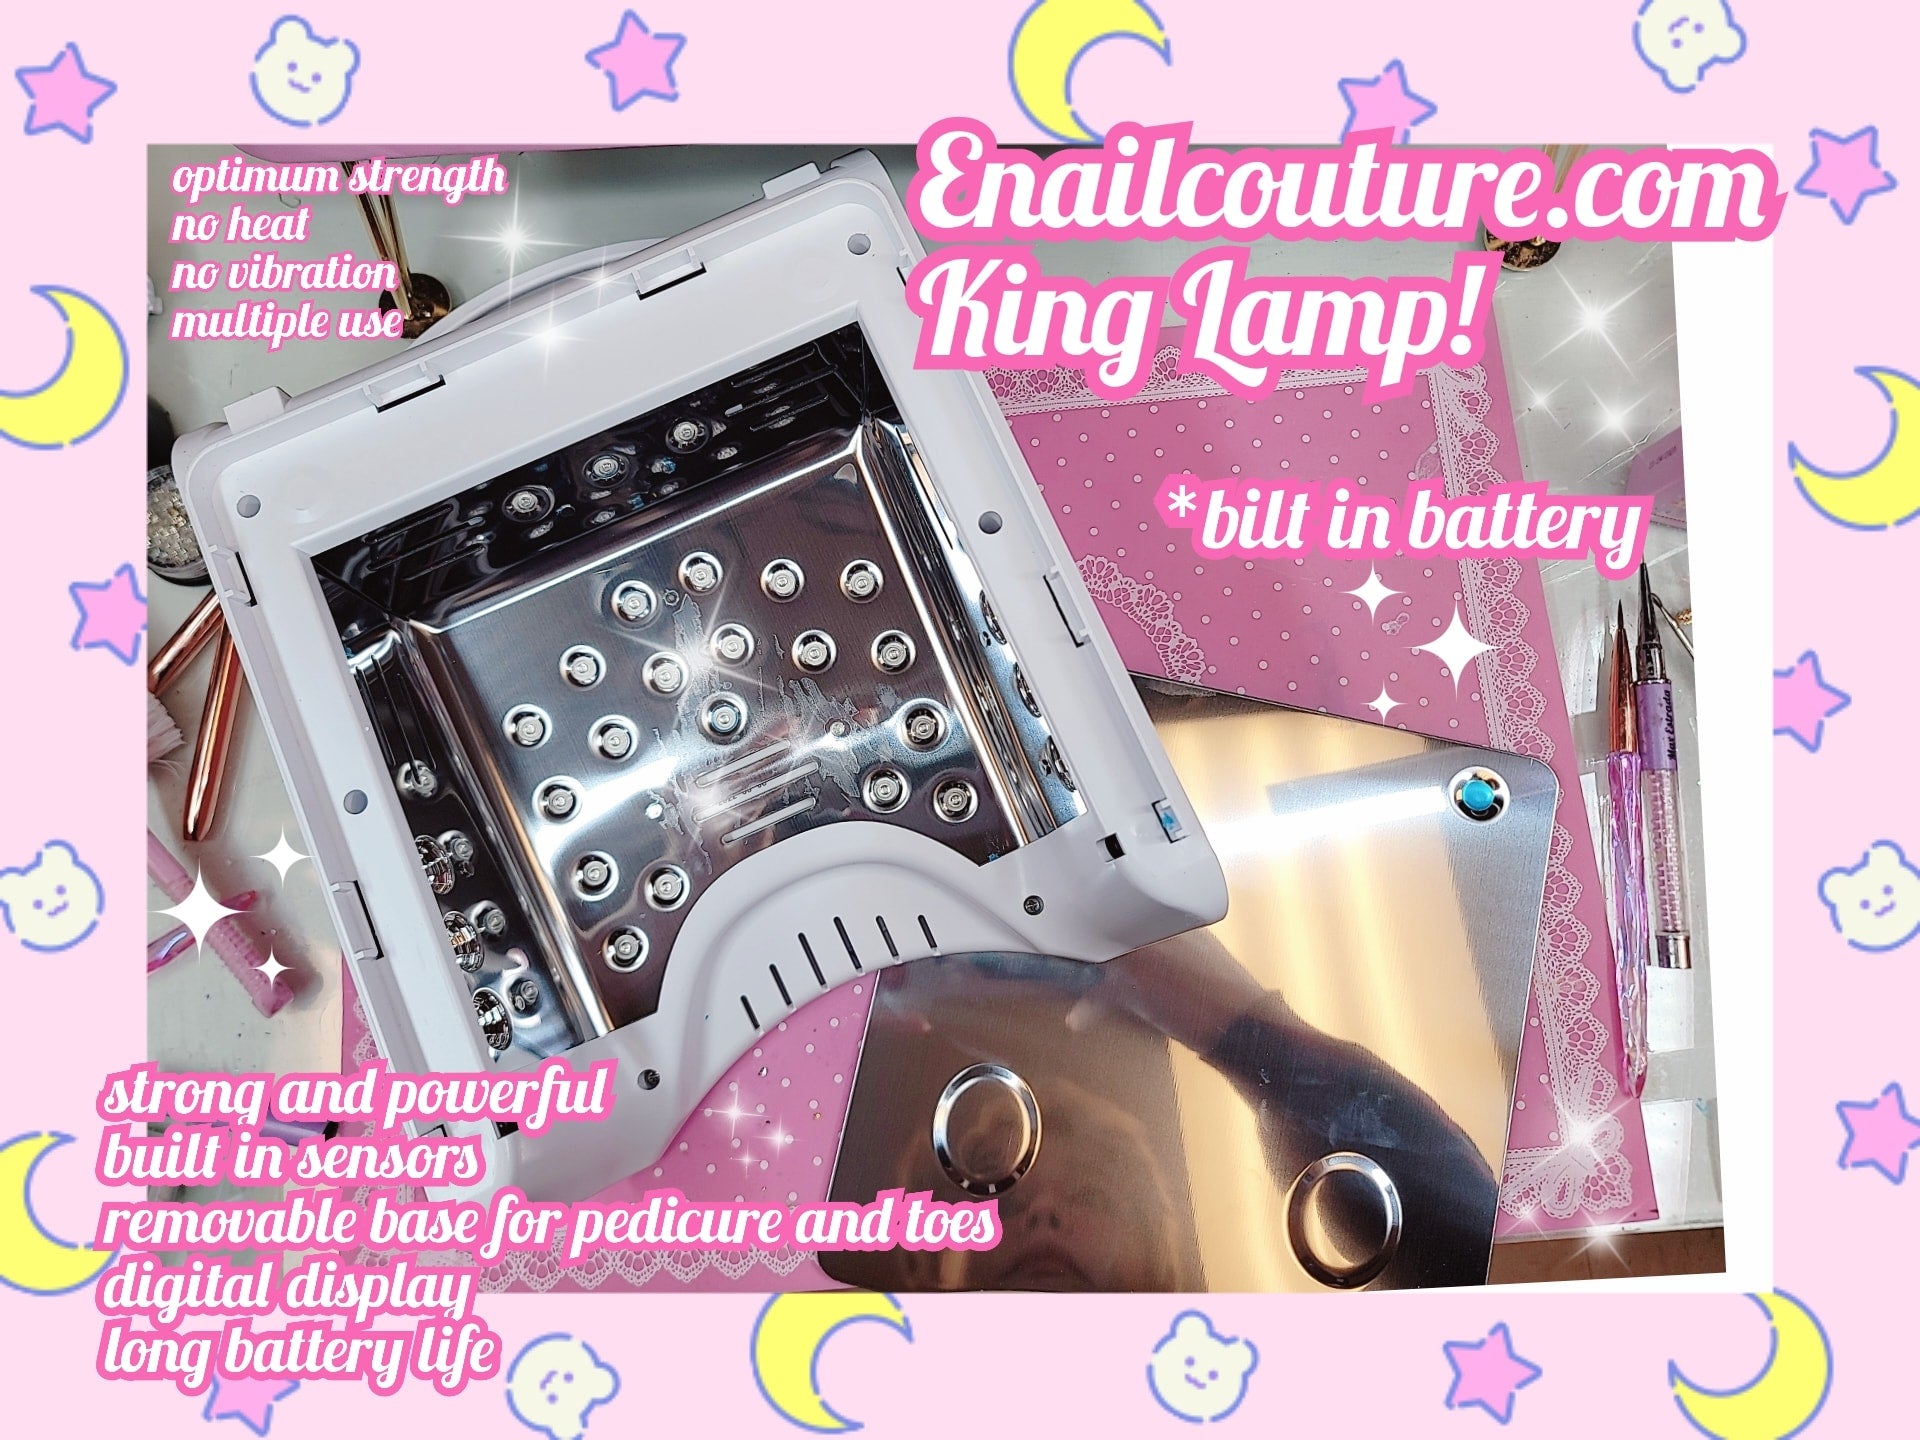 King Lamp ! (112W Rechargeable UV LED Nail Lamp, Faster Wireless Nail Dryer Gel Polish Light 42 Beads & Portable Handle, Professional Curing Lamp For Fingernail and Toenail, Auto Sensor & Quick Dry Nail Machine)